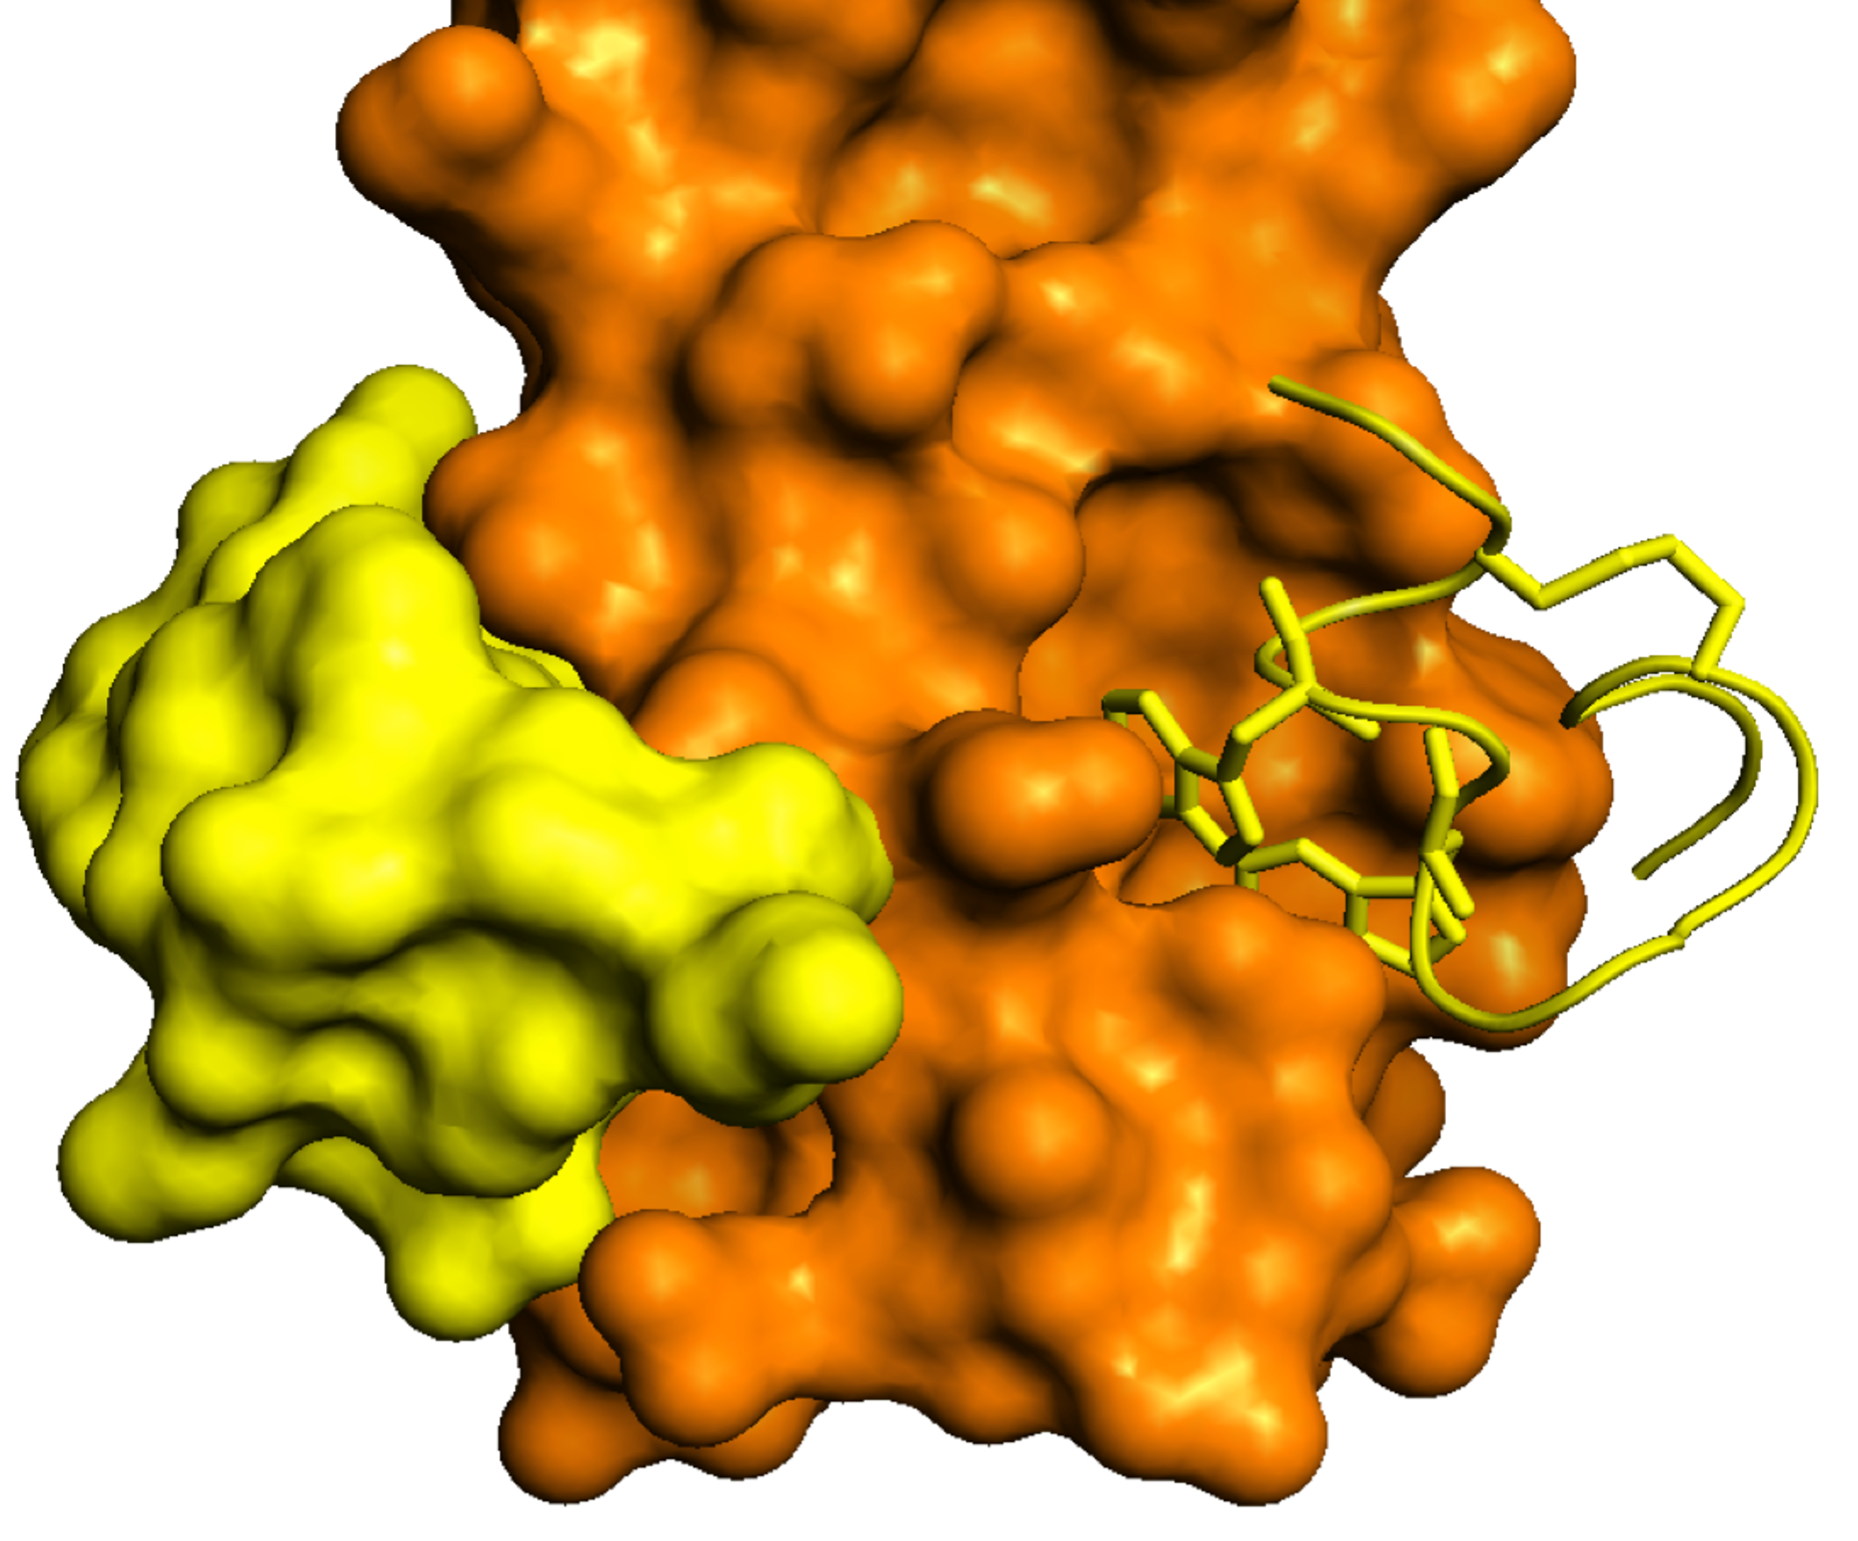 Structure showing different elements of a D-peptide inhibitor (yellow) binding to its HIV target.